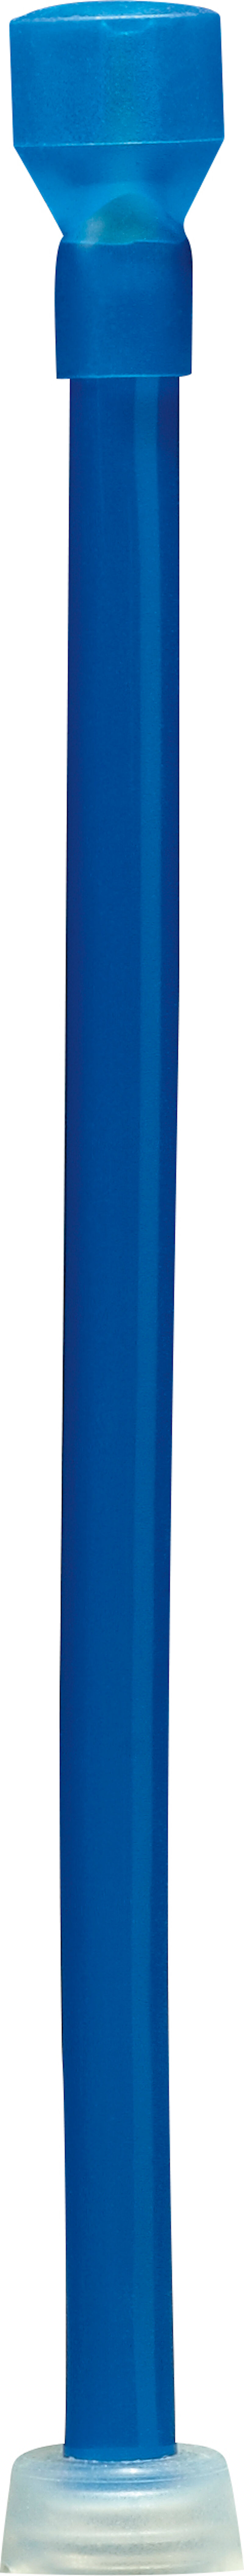 Camelbak Flask Tube Adapter pour gourdes Quick Stow - Pipette | Hardloop